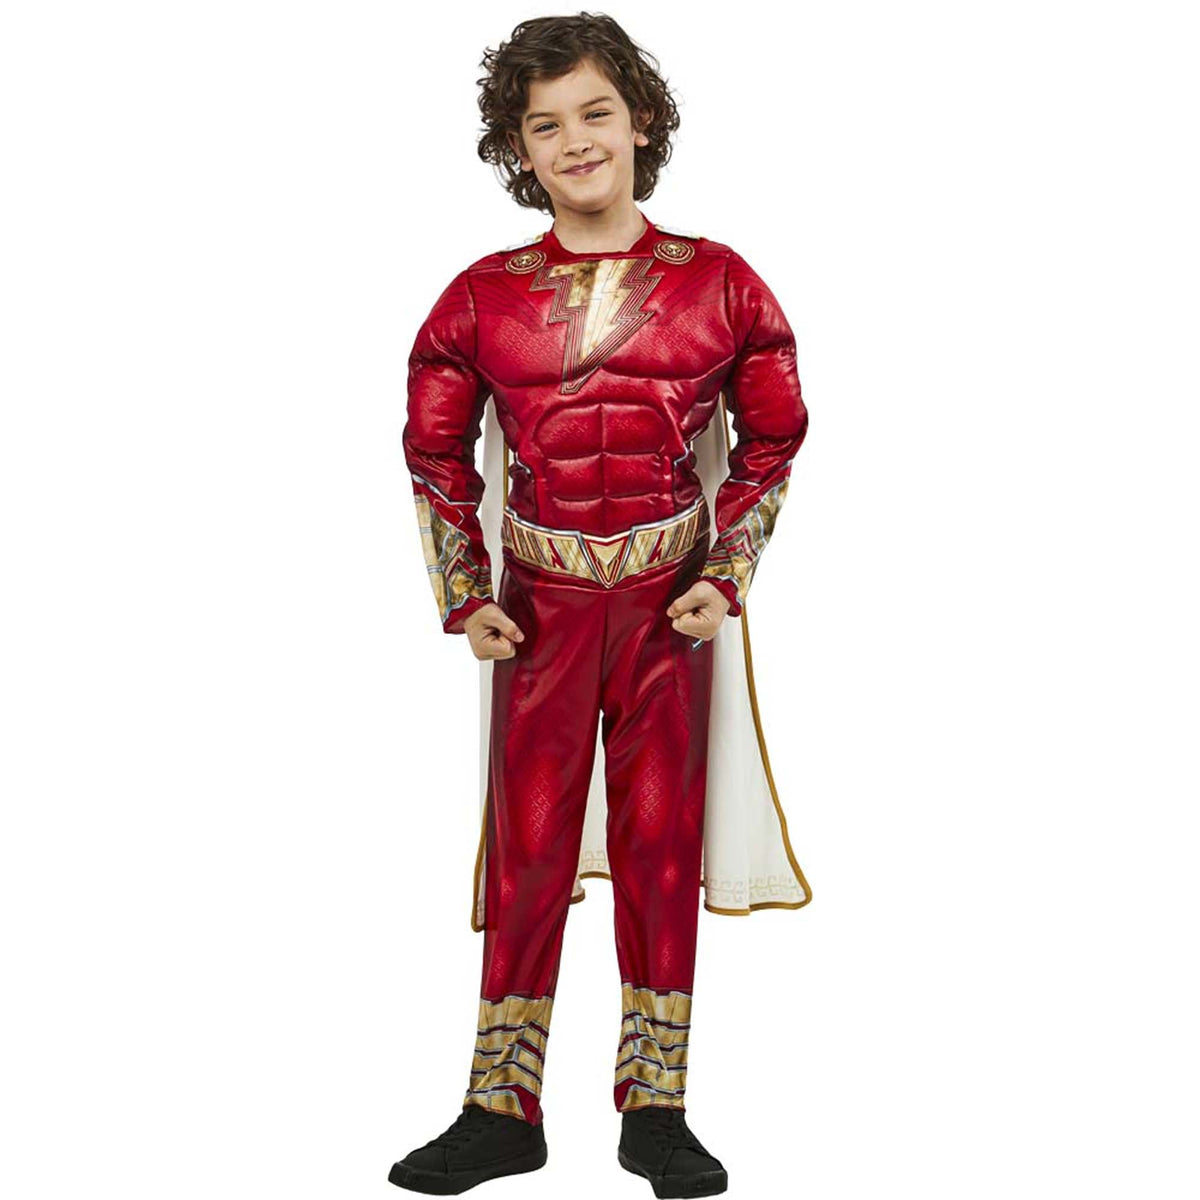 RUBIES II (Ruby Slipper Sales) Costumes DC Shazam Costume for Kids, Red Padded Jumpsuit with Cape